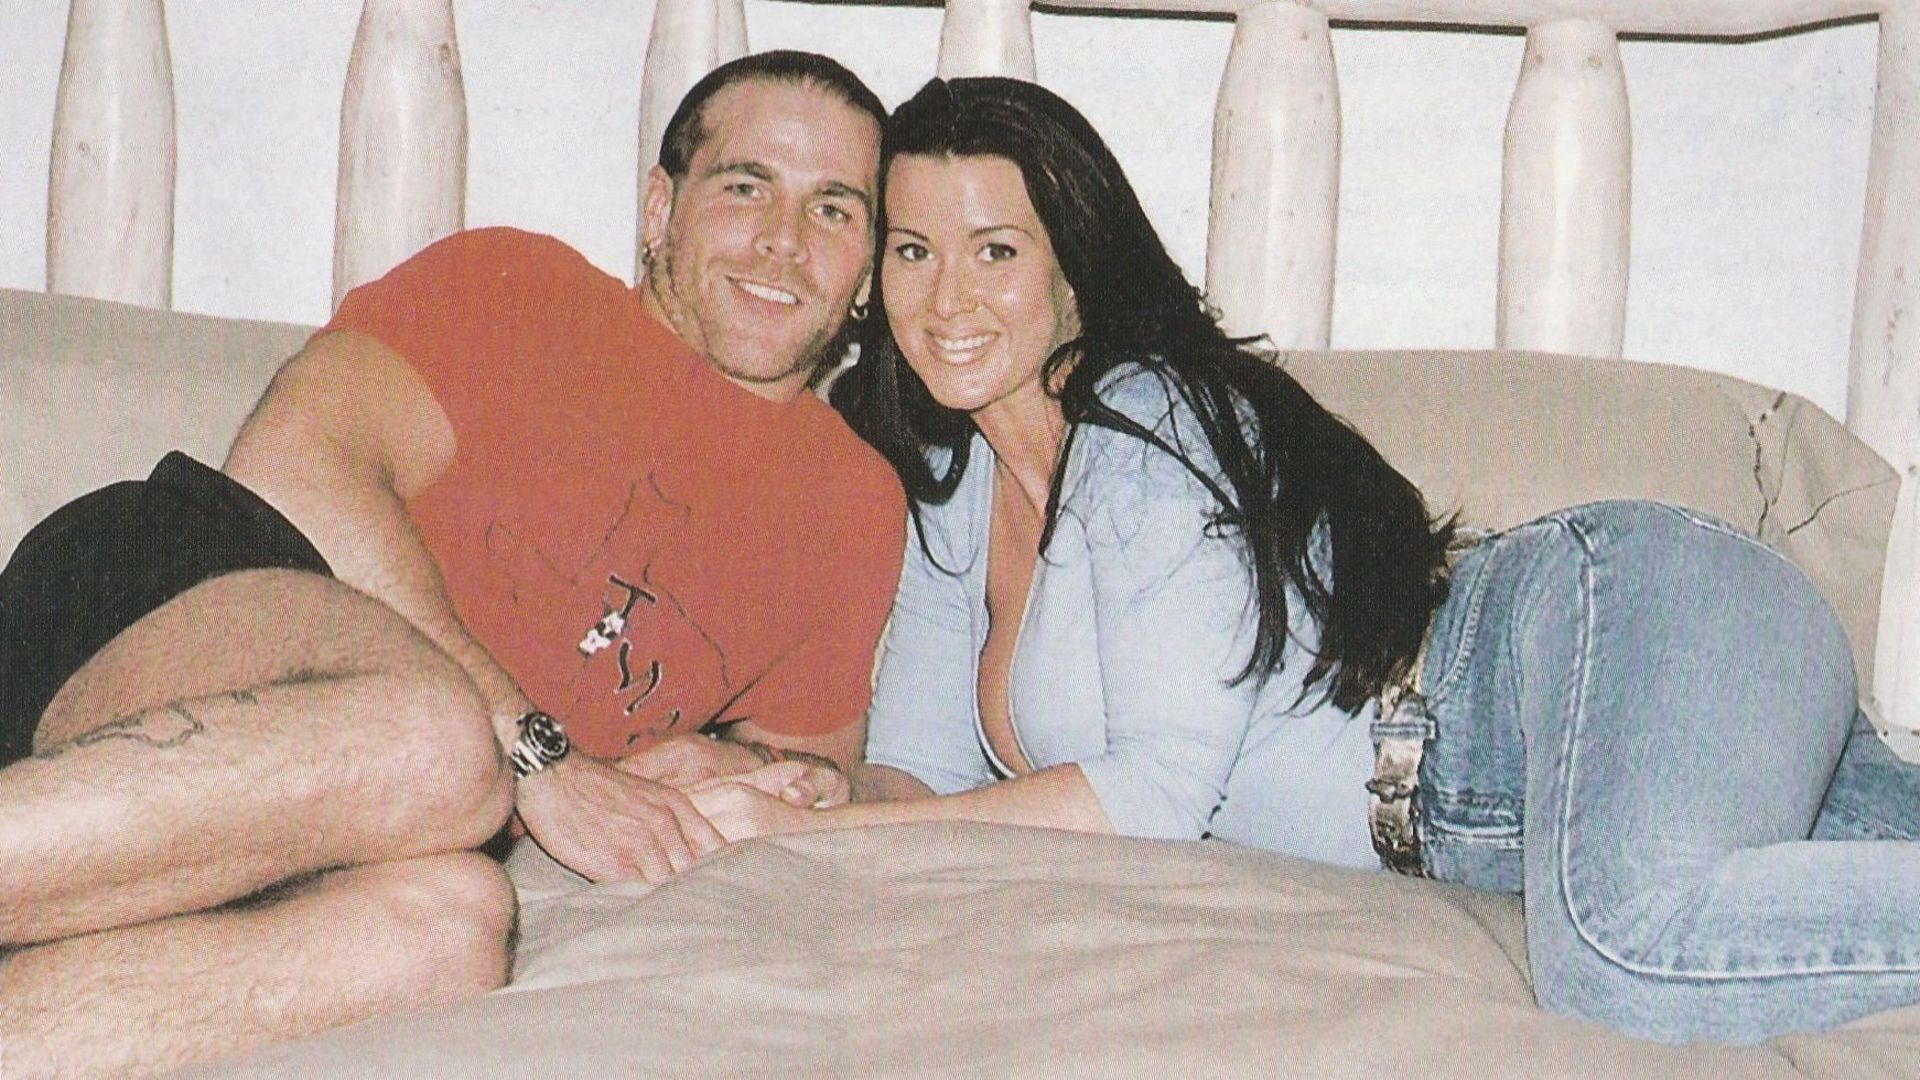 Rebecca Curci had no idea who Shawn Michaels was before dating him